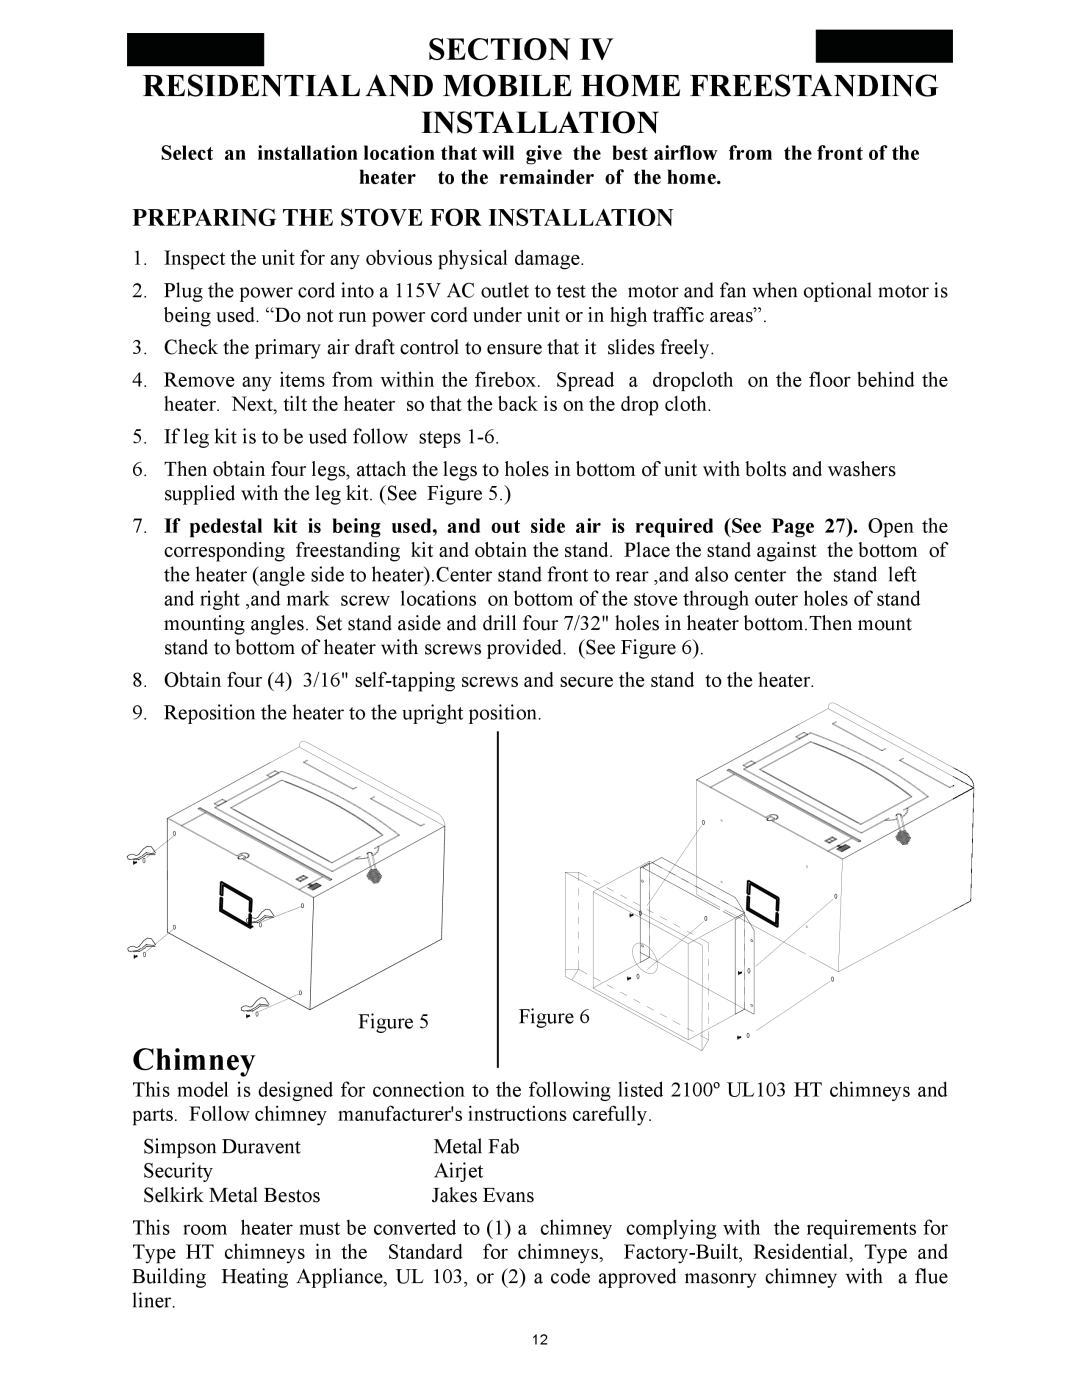 New Buck Corporation 21 installation instructions Chimney, Preparing The Stove For Installation 